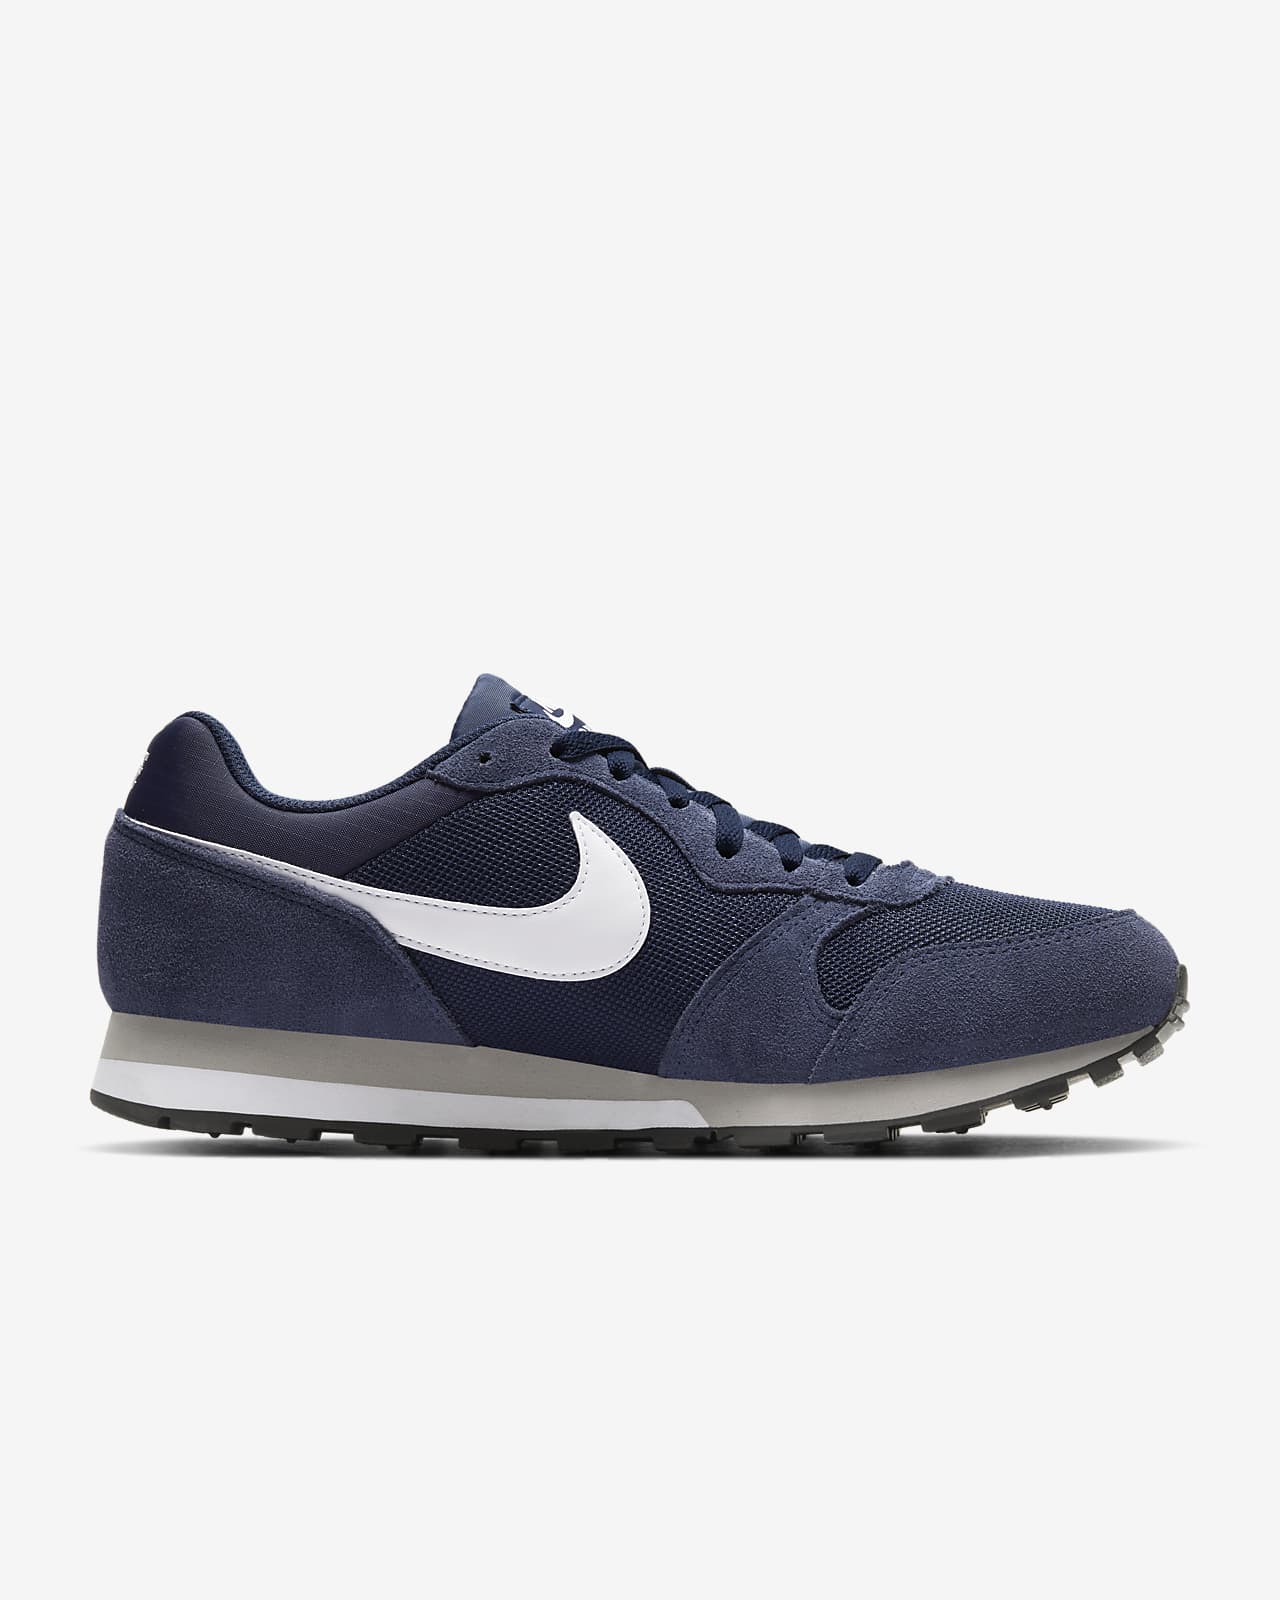 weefgetouw diefstal fout Nike Md Run 2 Hotsell, SAVE 60% - icarus.photos